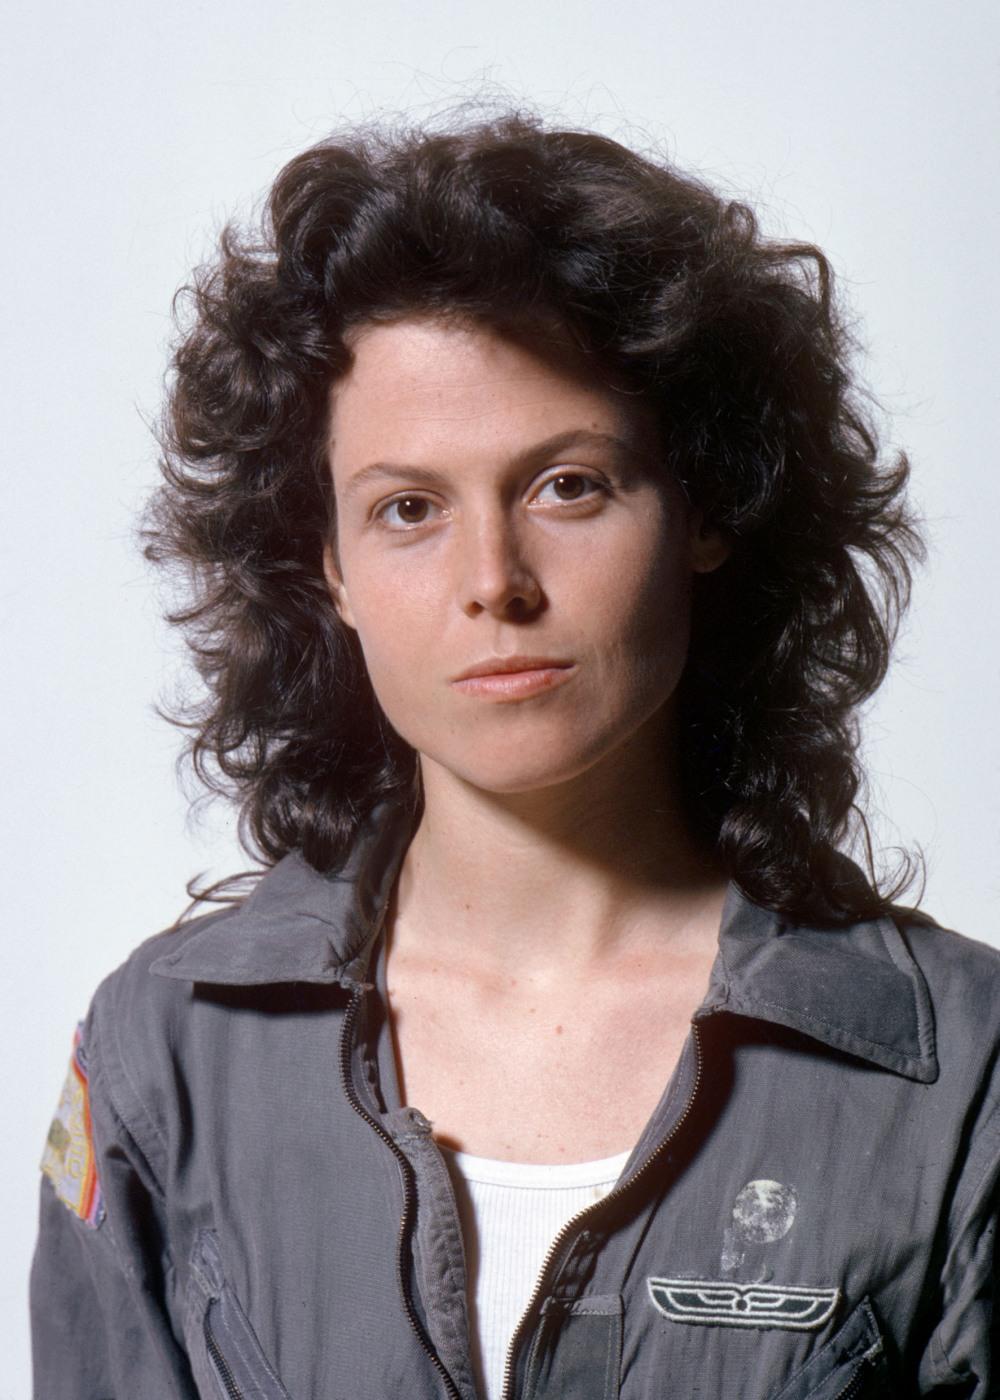 High Quality Sigourney Weaver Wallpaper. Full HD Picture